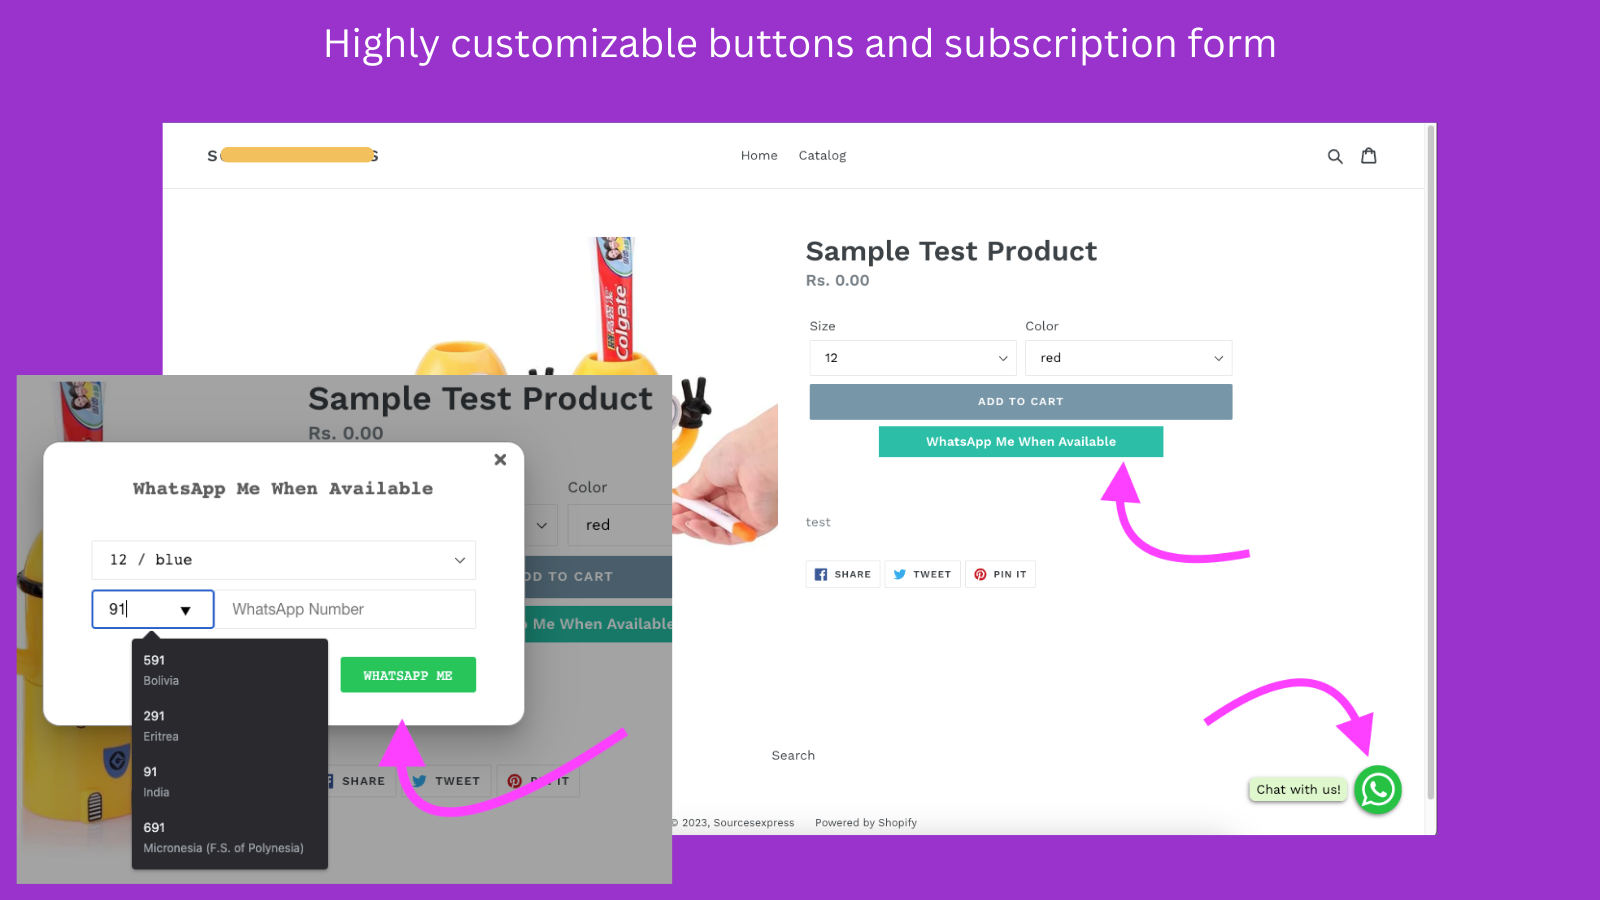 Highly customizable buttons and subscription form